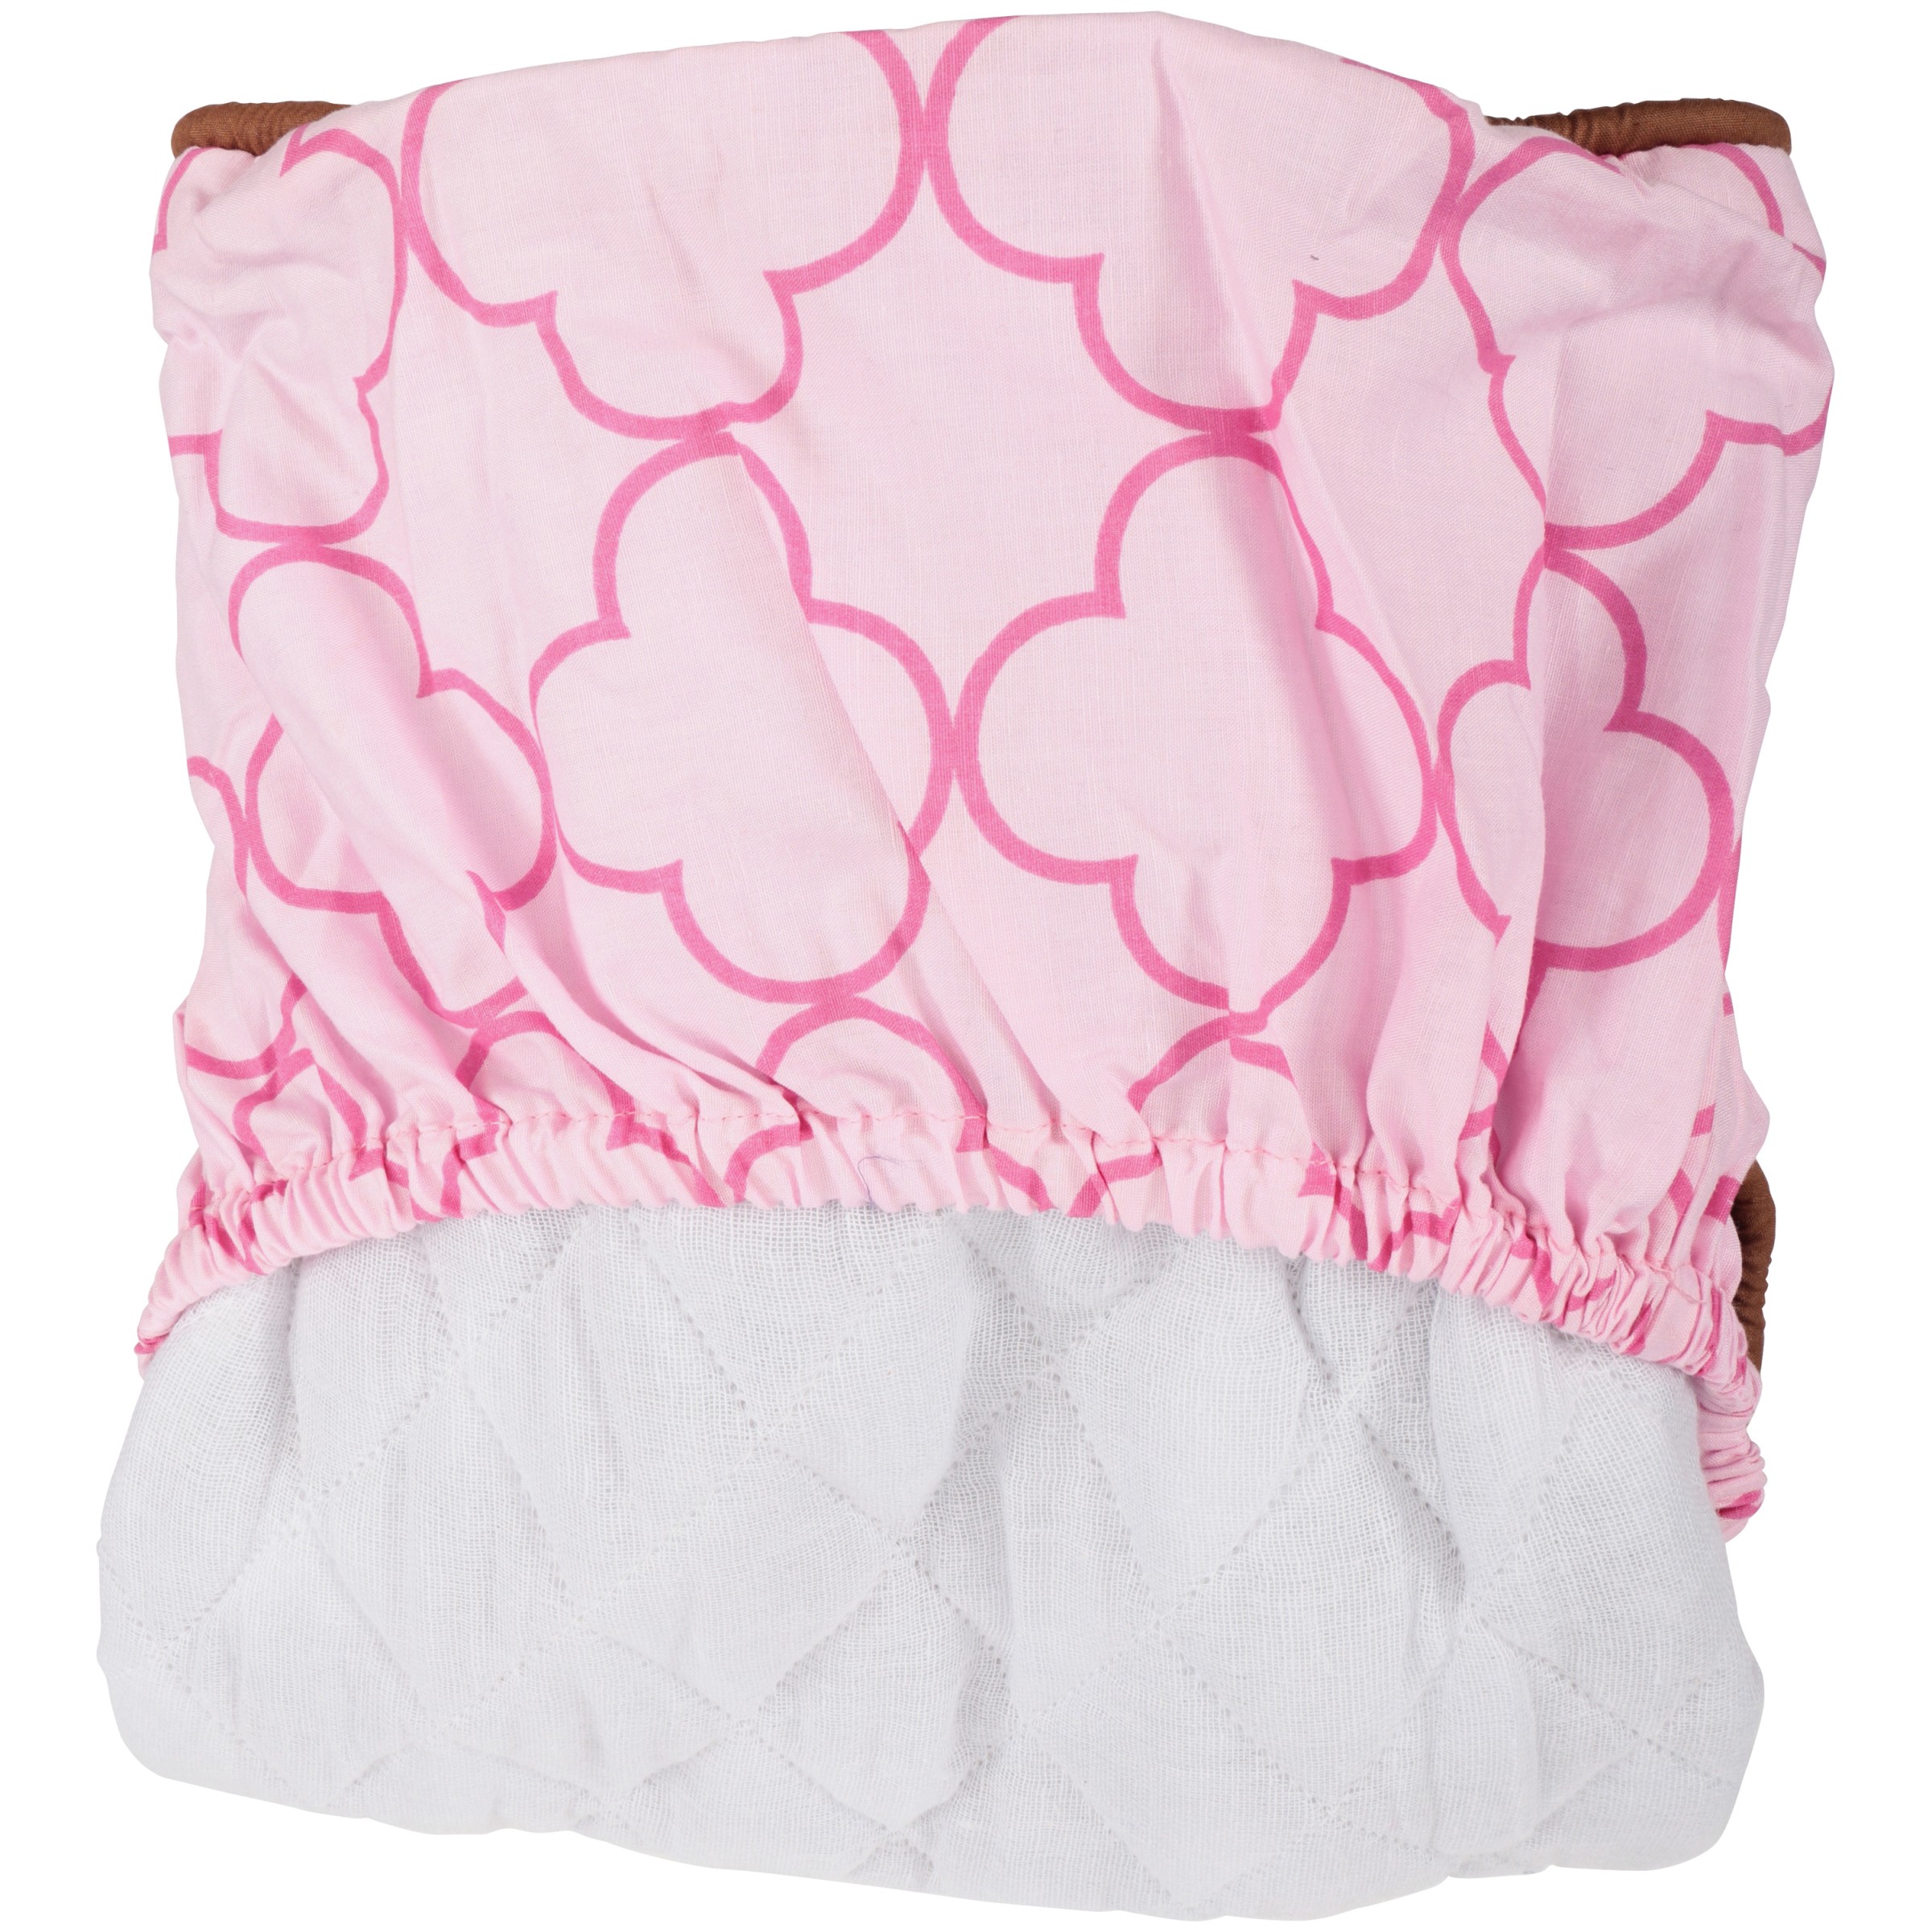 Bacati Butterflies Pink/Chocolate Changing Pad Cover - image 5 of 5